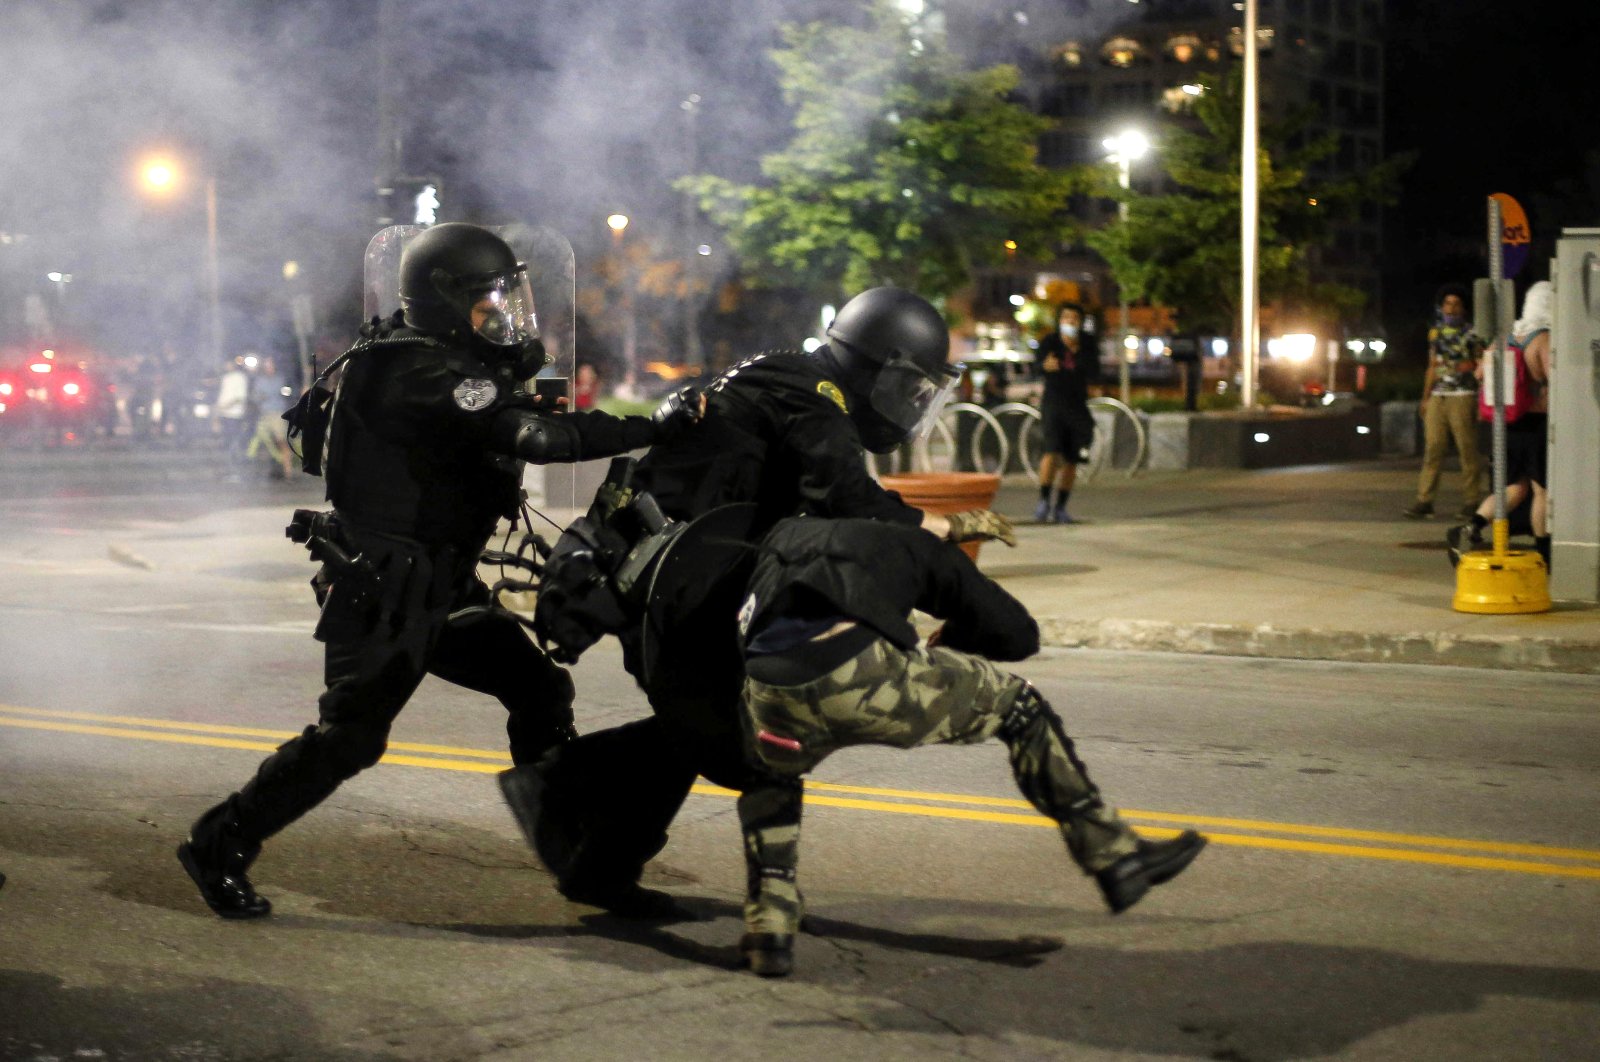 Police clash with protesters in downtown Des Moines, Iowa, U.S., May 30, 2020. (The Des Moines Register via AP)